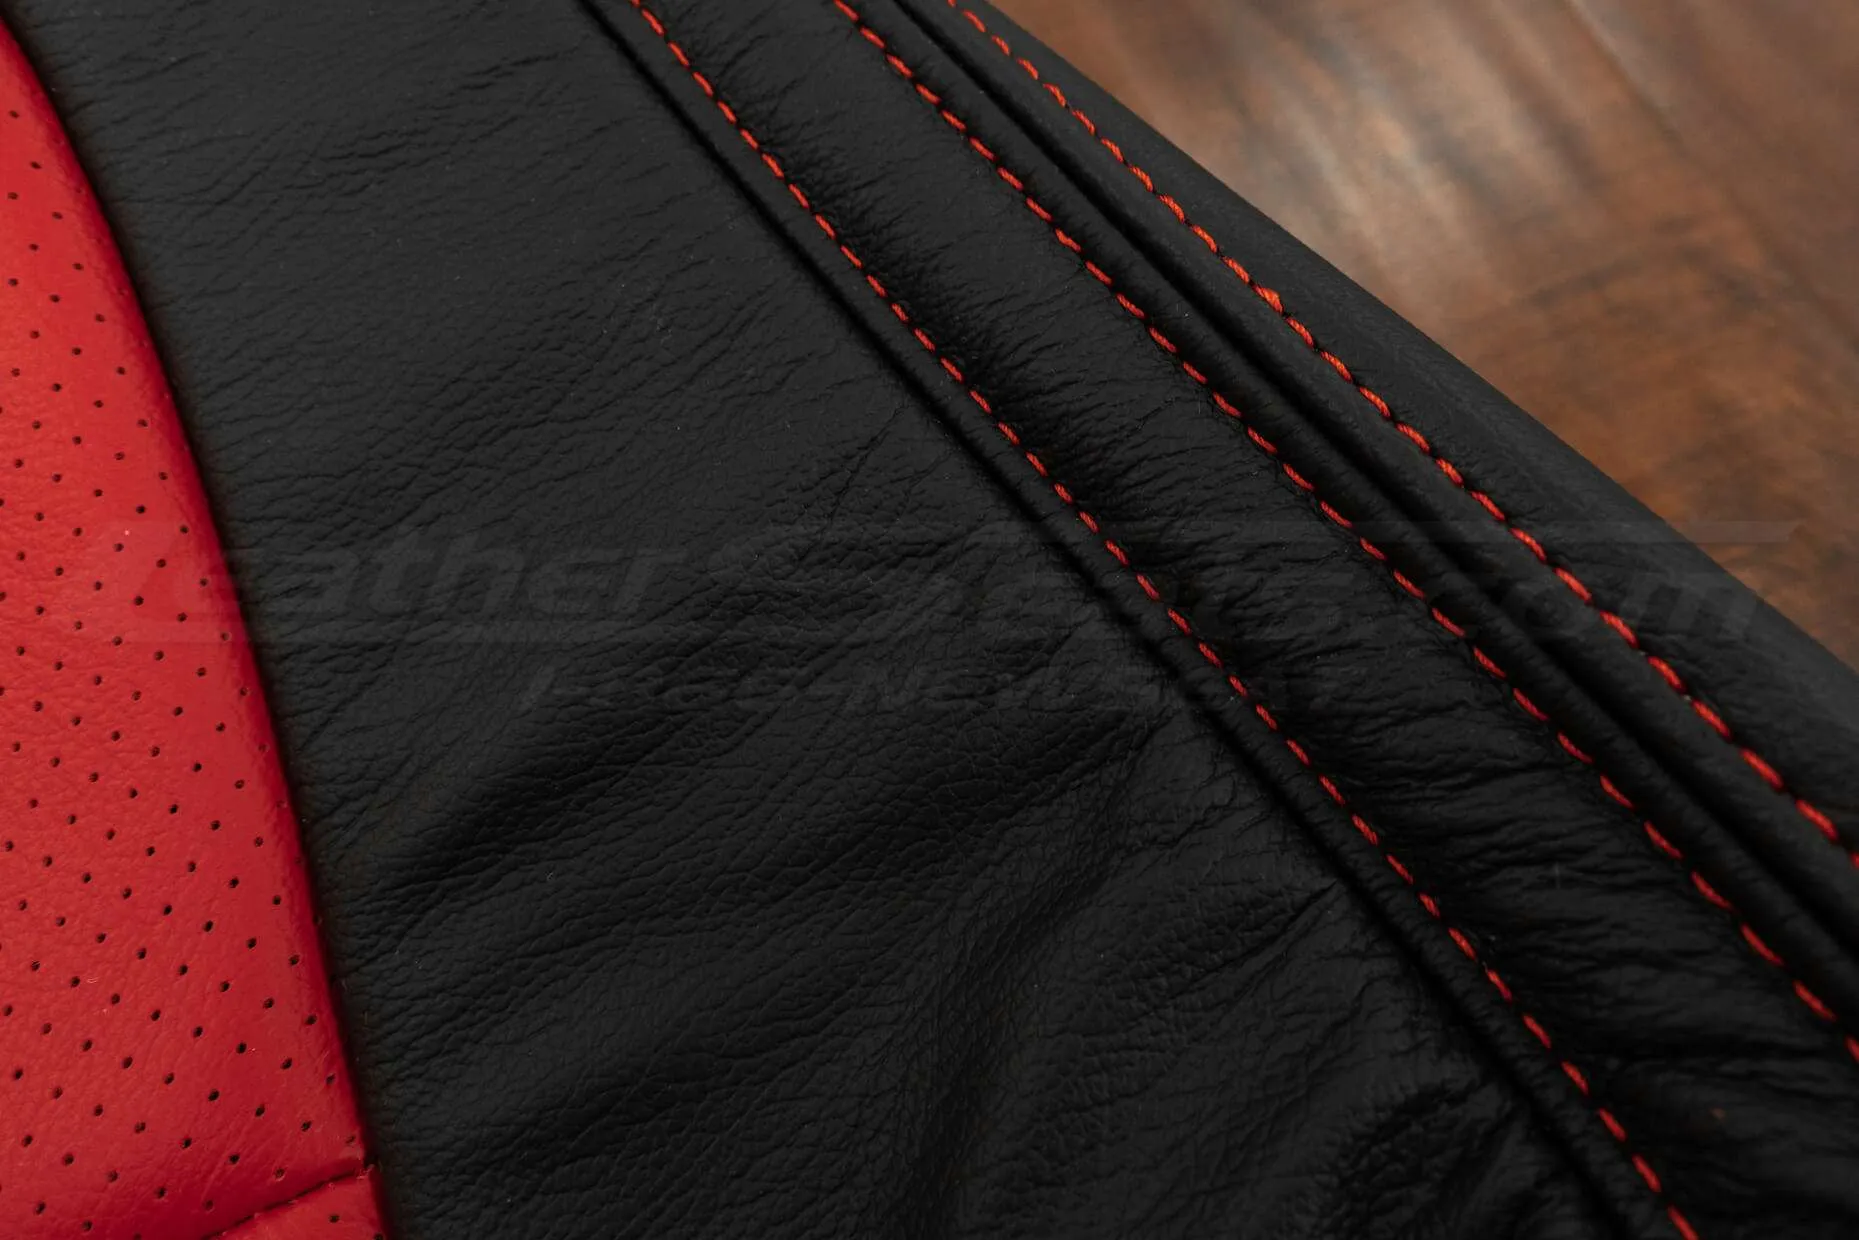 Chevrolet Camaro Leather Kit - Black & Bright Red - Bright Red double-stitching close-up